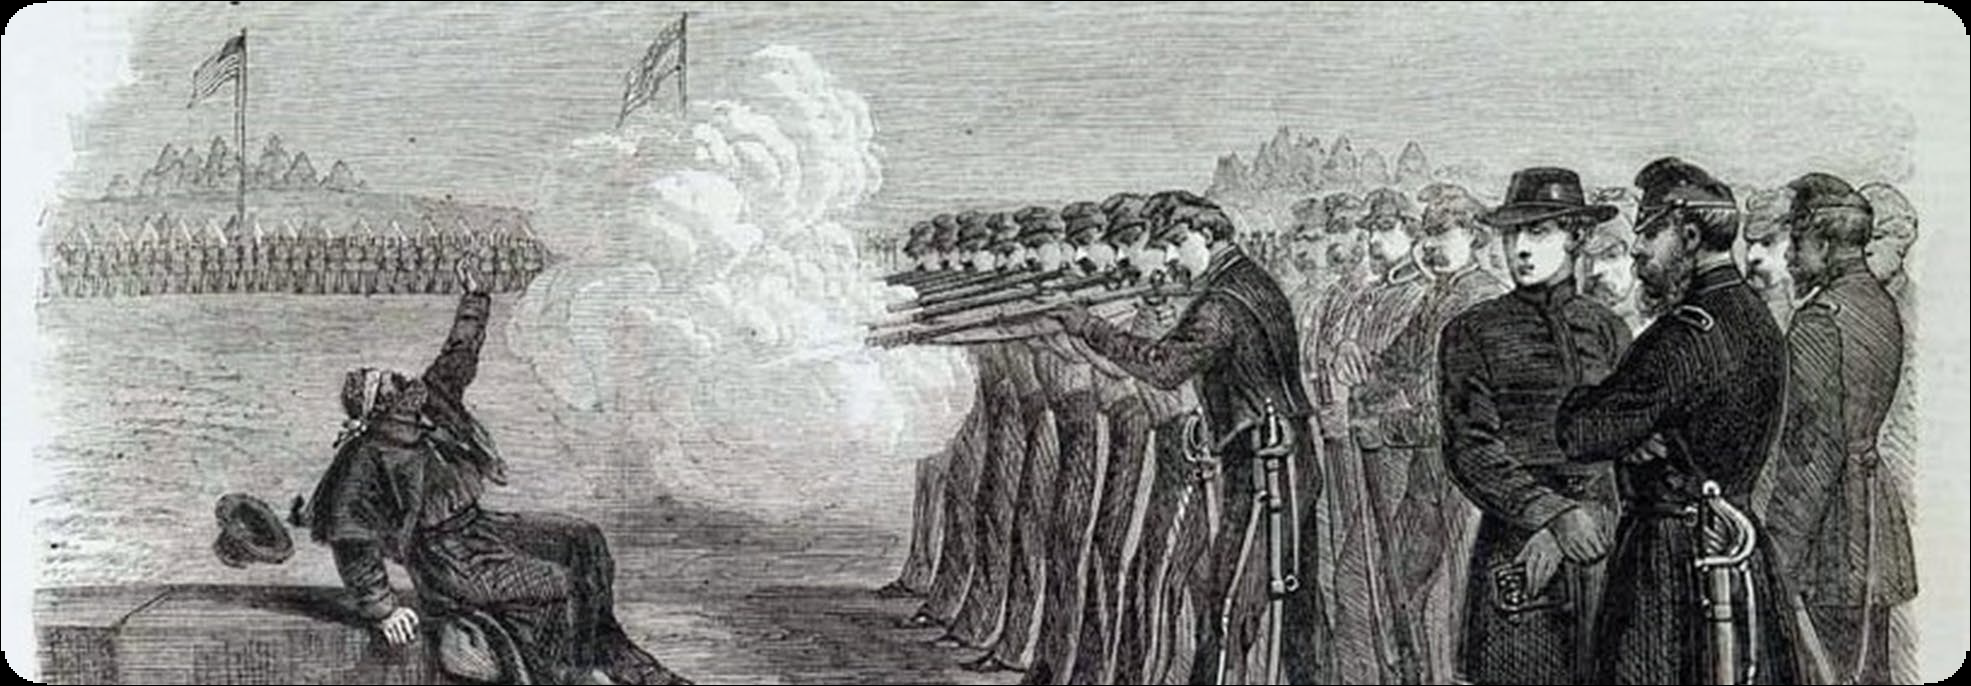 drawing of group of soldiers executing another soldier by firing squad